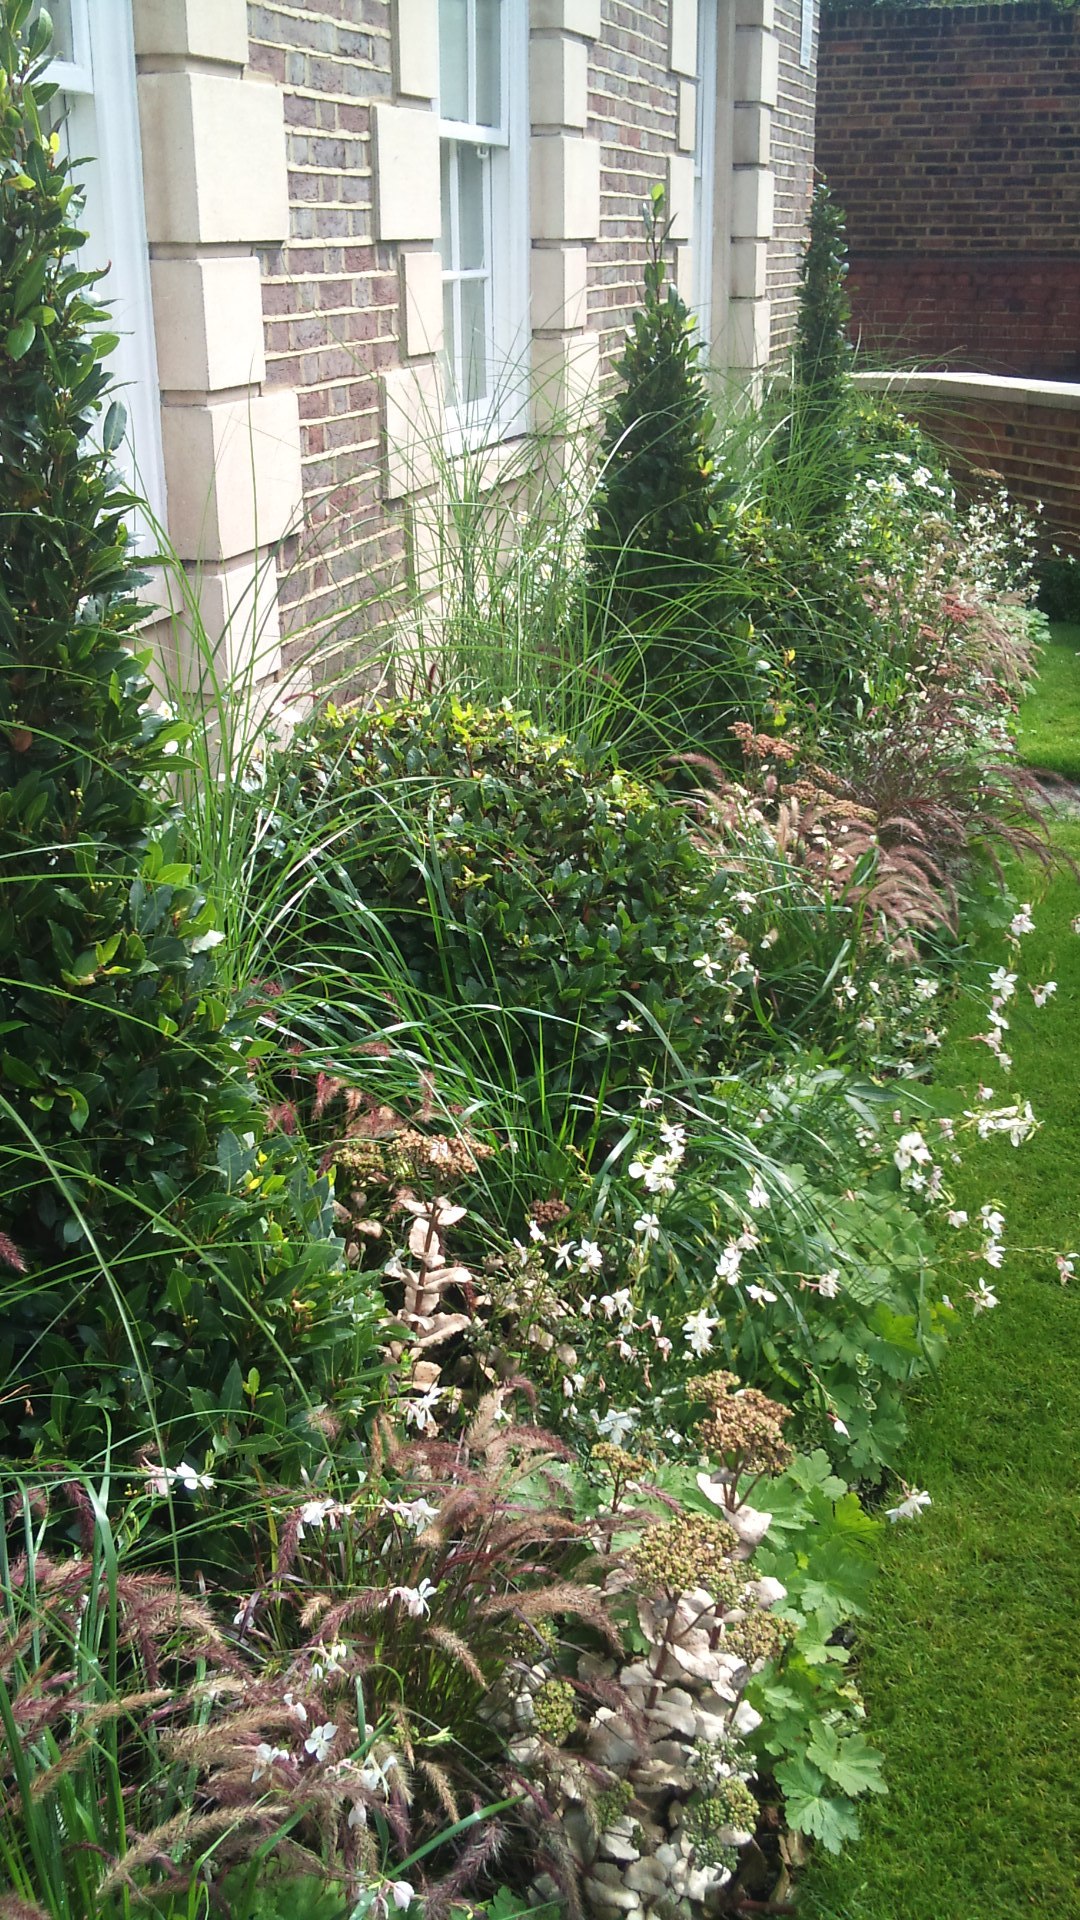 Abbey road close up of planting bay spires grasses and soft flowers